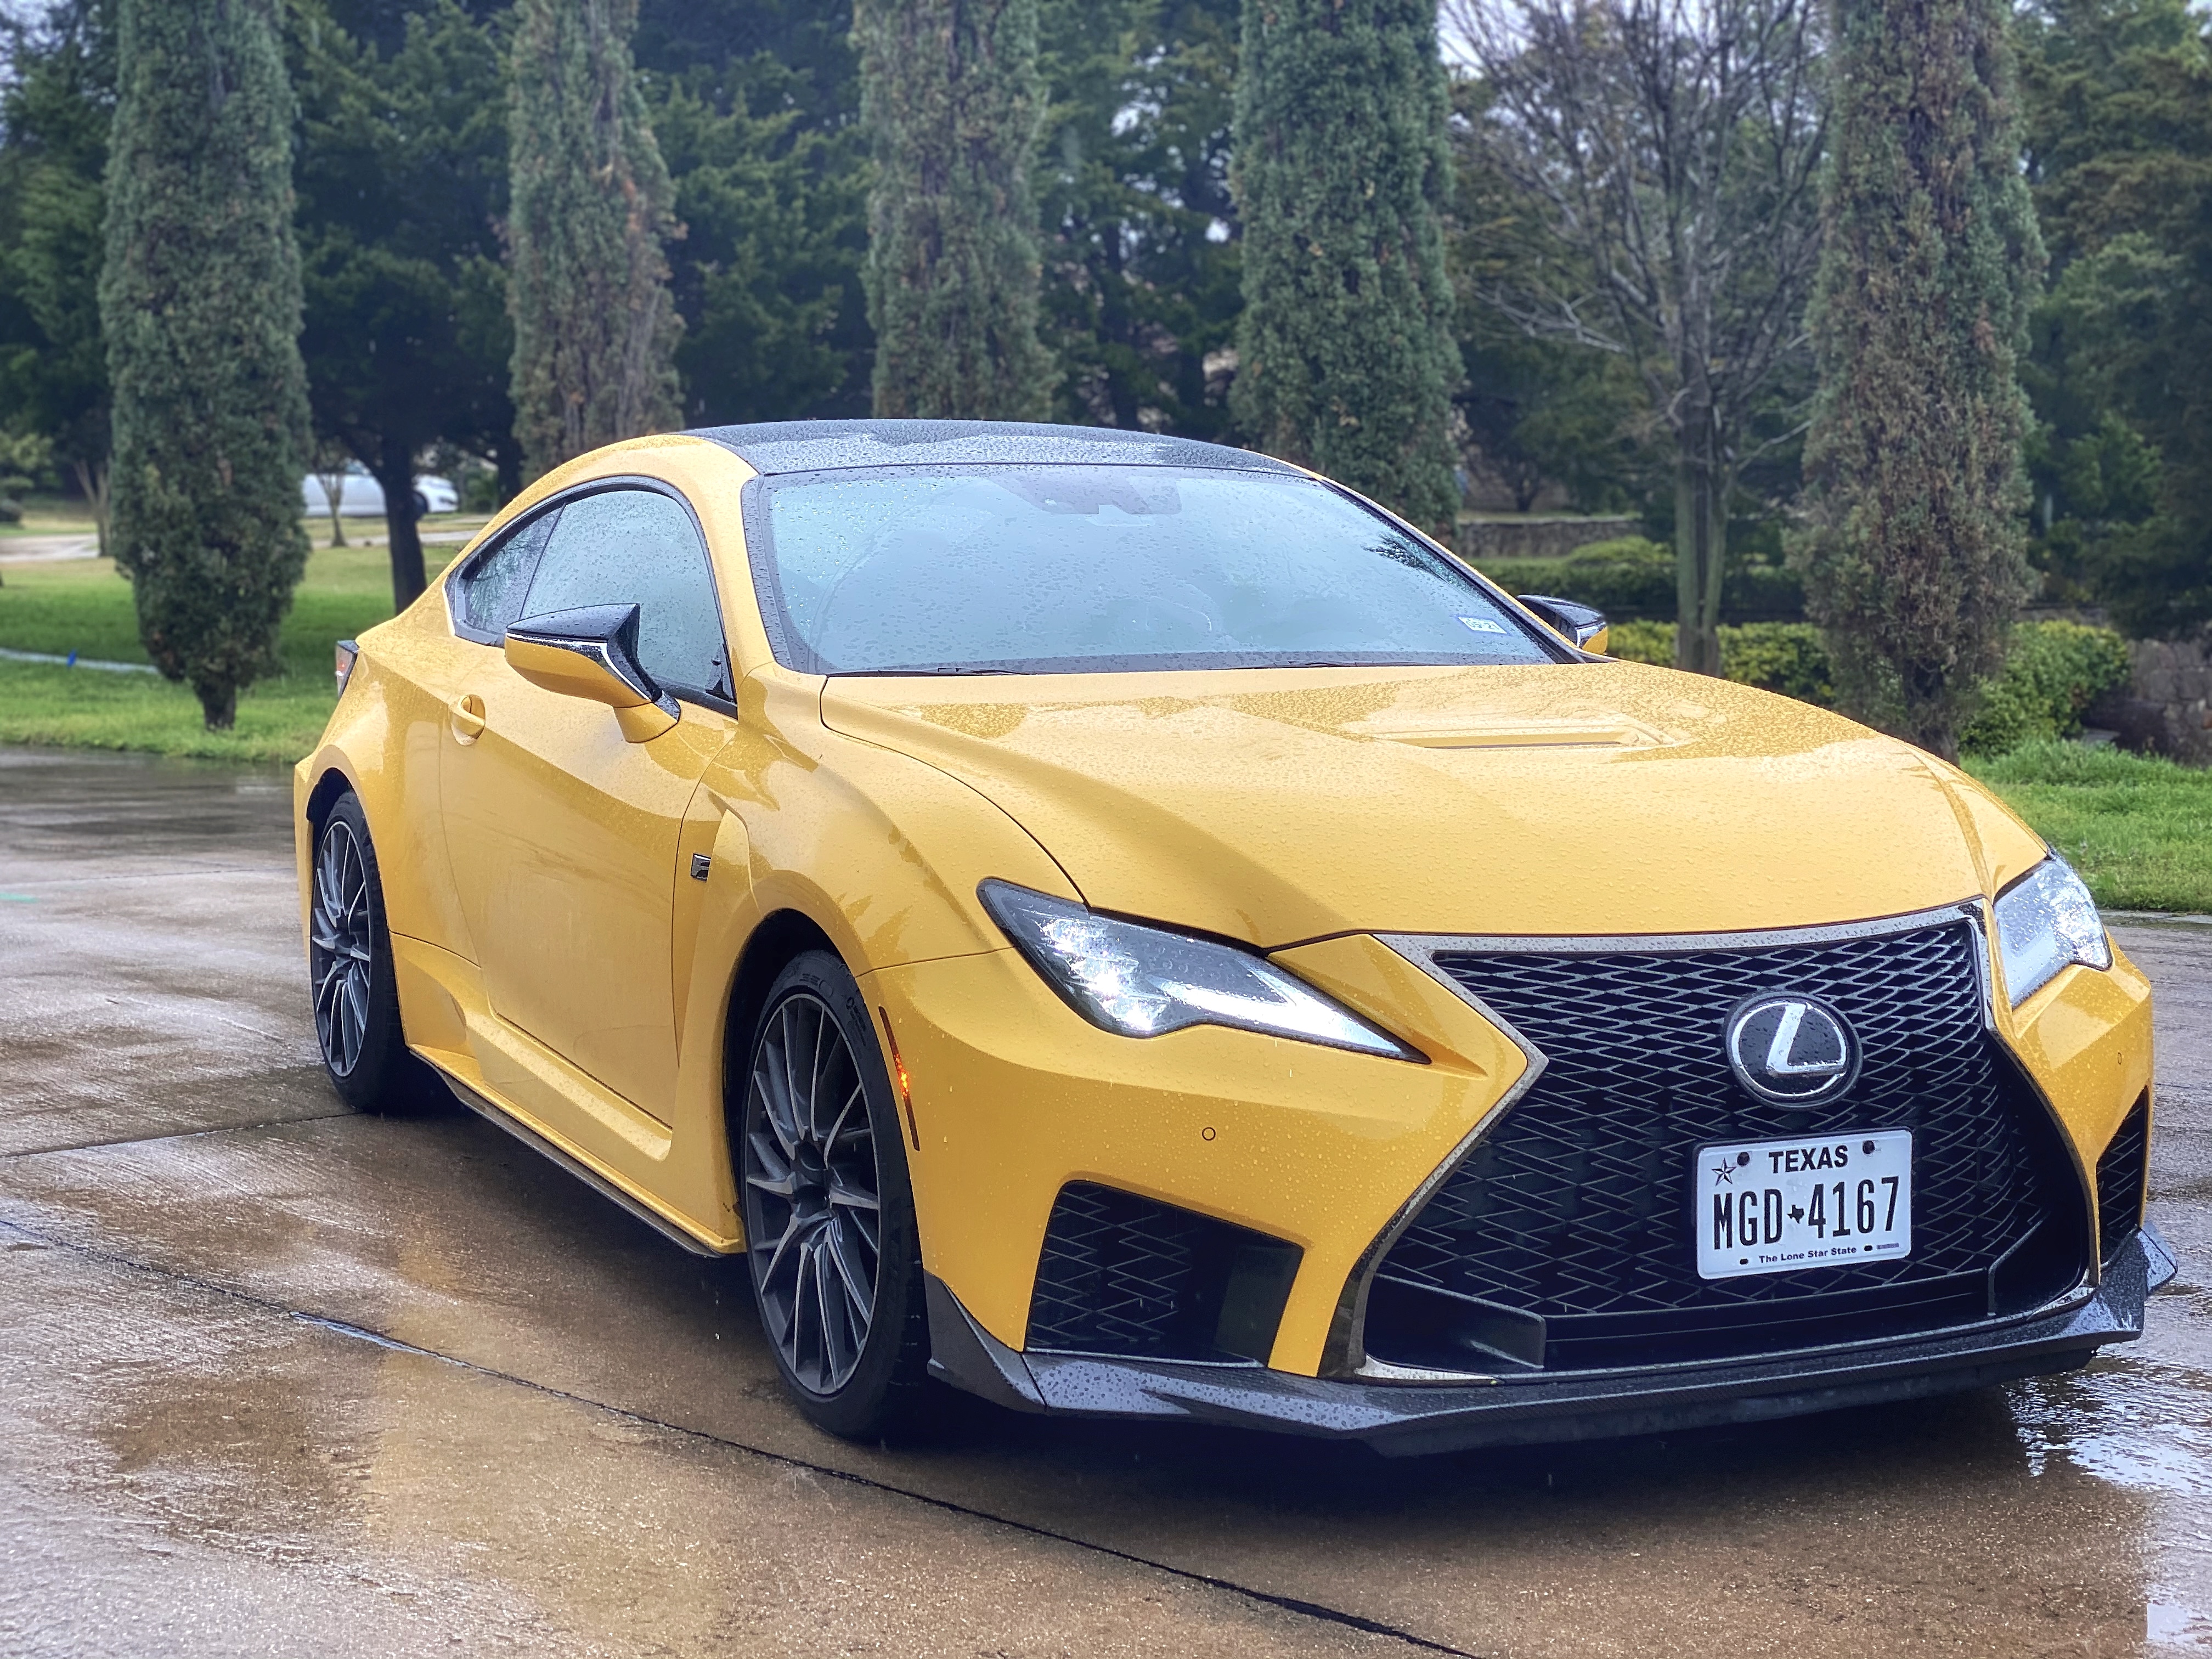 Is The 2020 Lexus Rc F The Coolest Lexus Ever Made